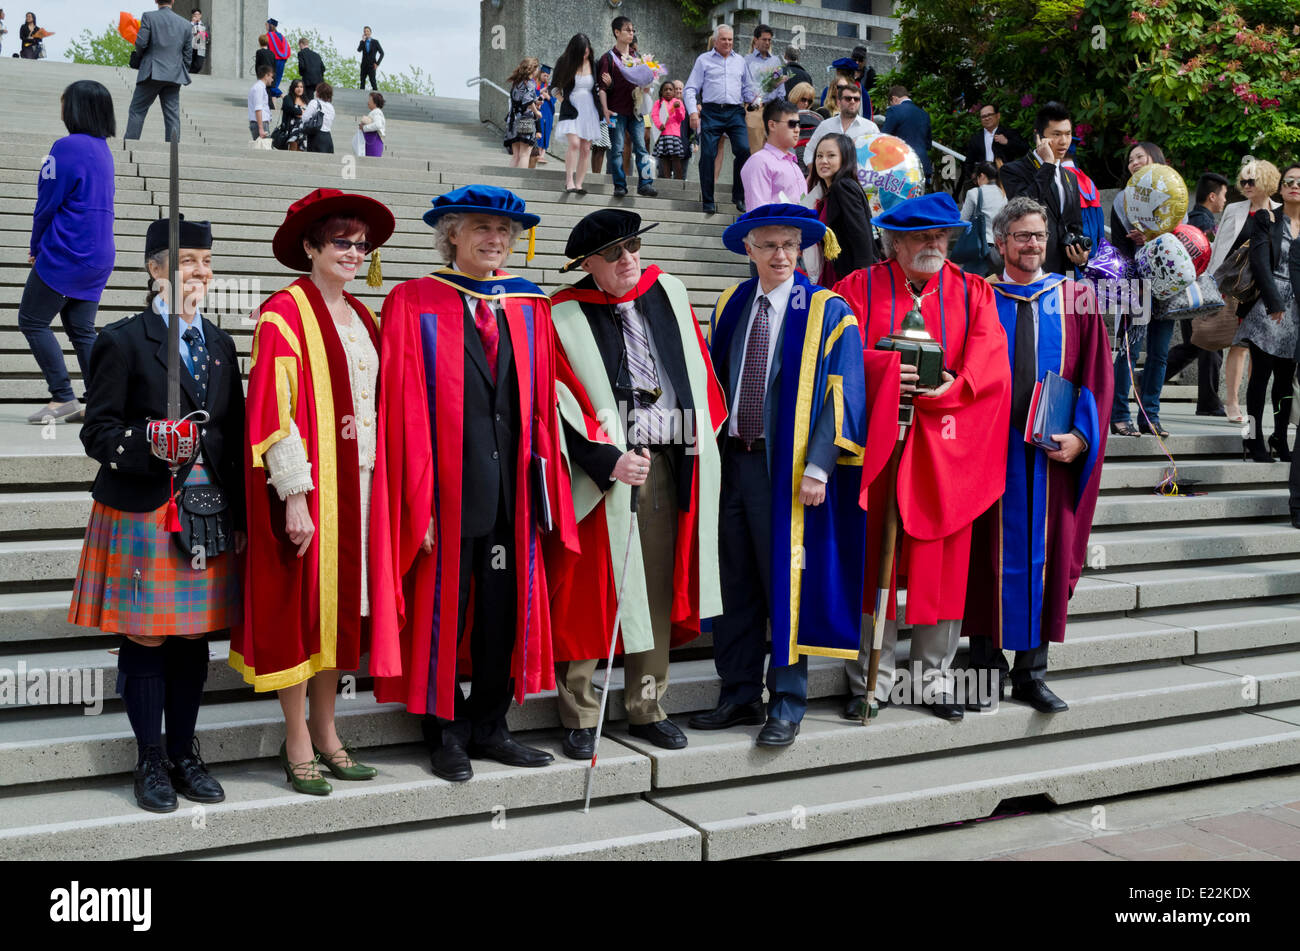 BURNABY, BC, CANADA.  JUNE 12, 2014:  Dignitaries in the Simon Fraser University Spring 2014 convocation for the Faculty of Arts and Social Sciences stand together after the ceremony. From left to right: the Claymore bearer; Chancellor Dr. Carole Taylor; recipient of Honorary Degree of Science Dr. Steven Pinker; Professor Emeritus Dr. Charles Crawford; University President Andrew Petter, Mace Bearer Dr. Robert Gordon, and Chief Marshall Dr. Neil Watson. Well-known psychologist Dr. Steven Pinker had given the Convocation Address. Credit: Maria Janicki/Alamy. Stock Photo